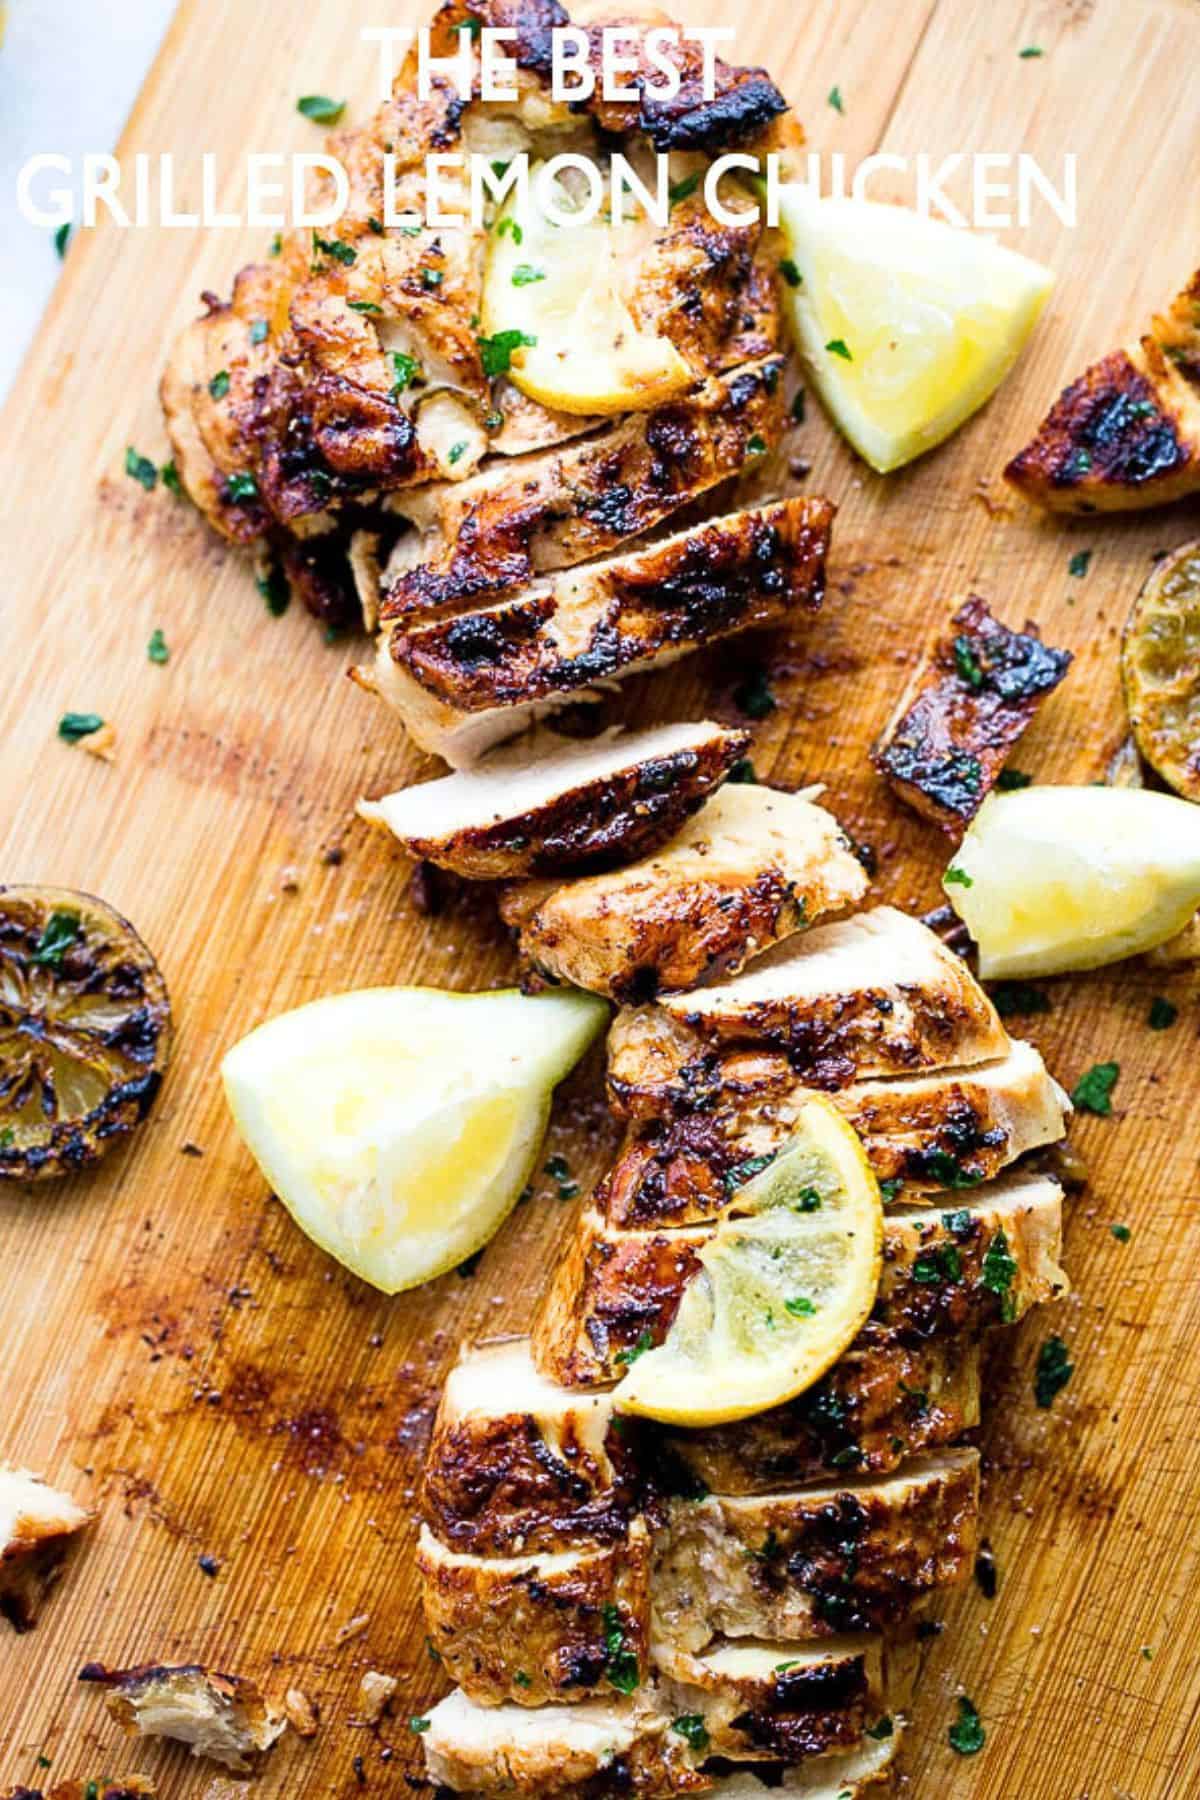 Sliced chicken breast on a cutting board with lemon slices arranged around it.